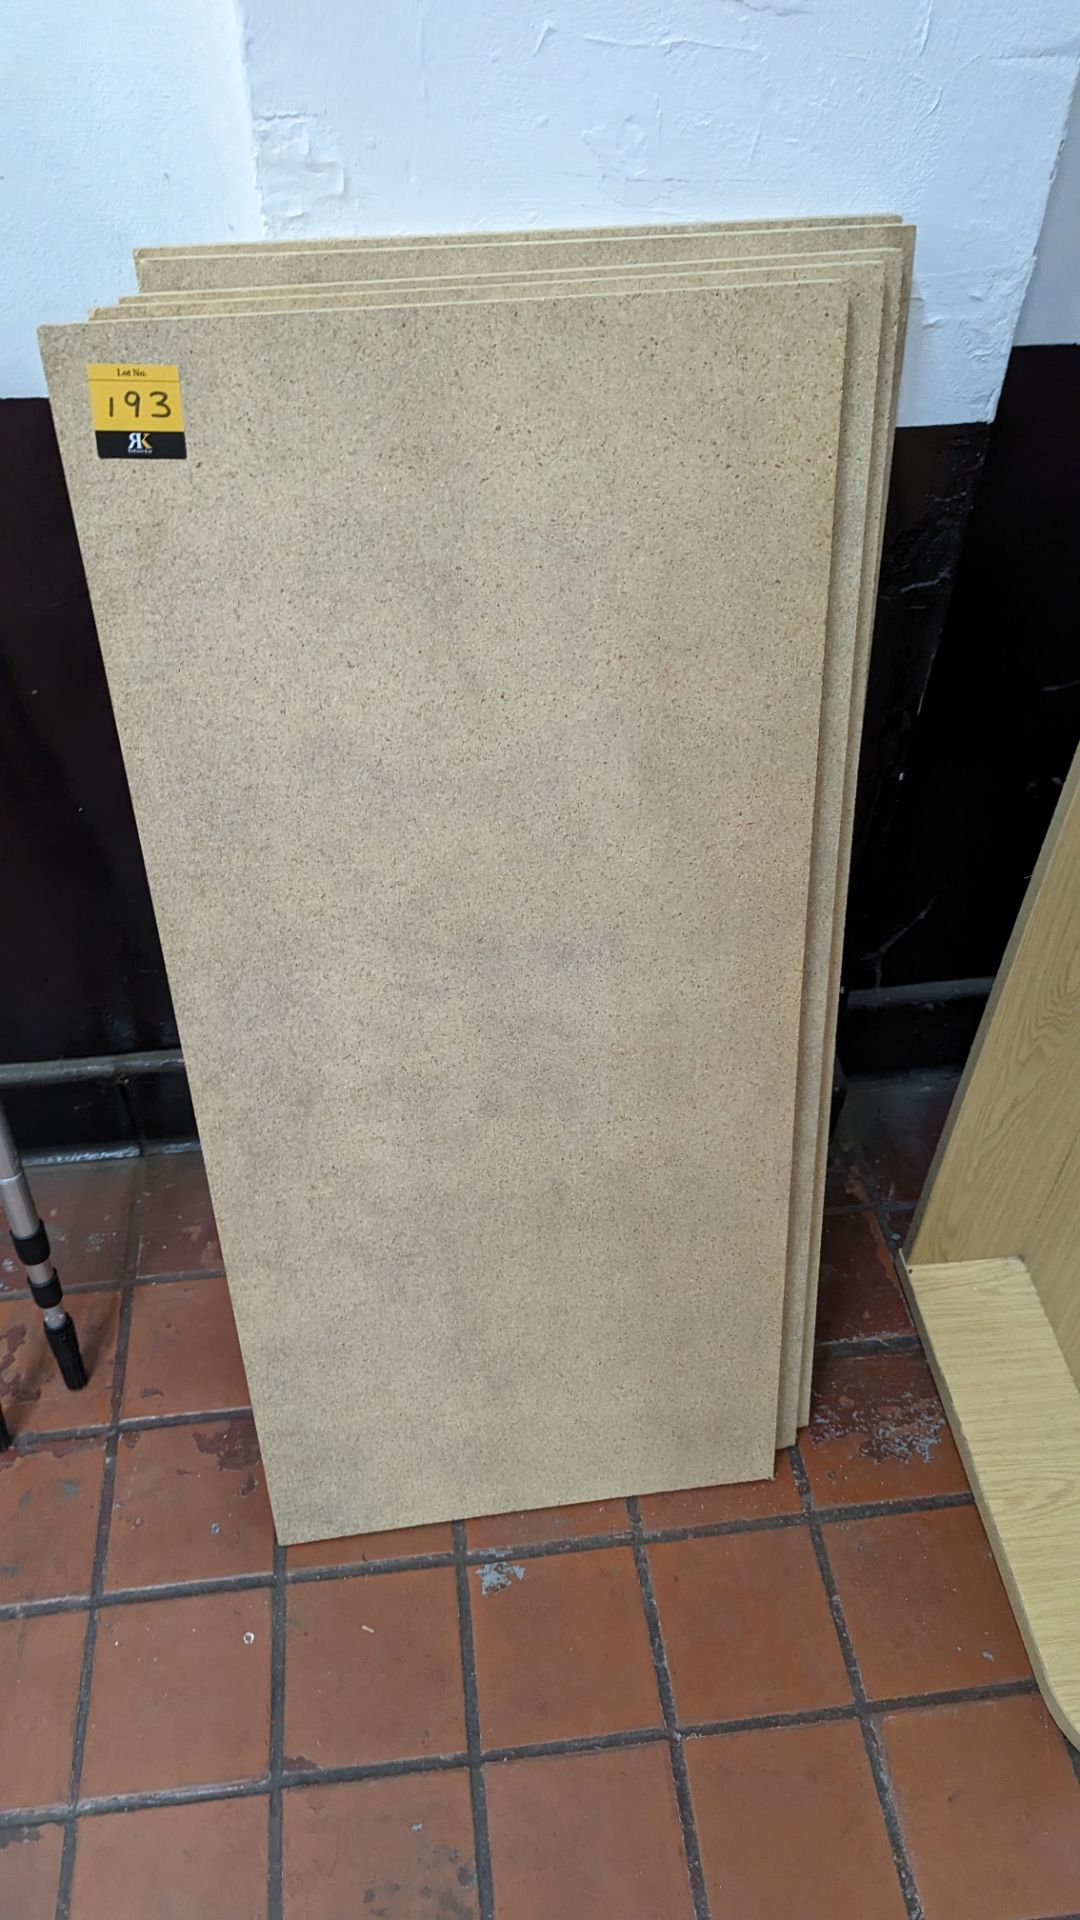 5 chipboard shelves each measuring approximately 100cm x 46cm - Image 3 of 4